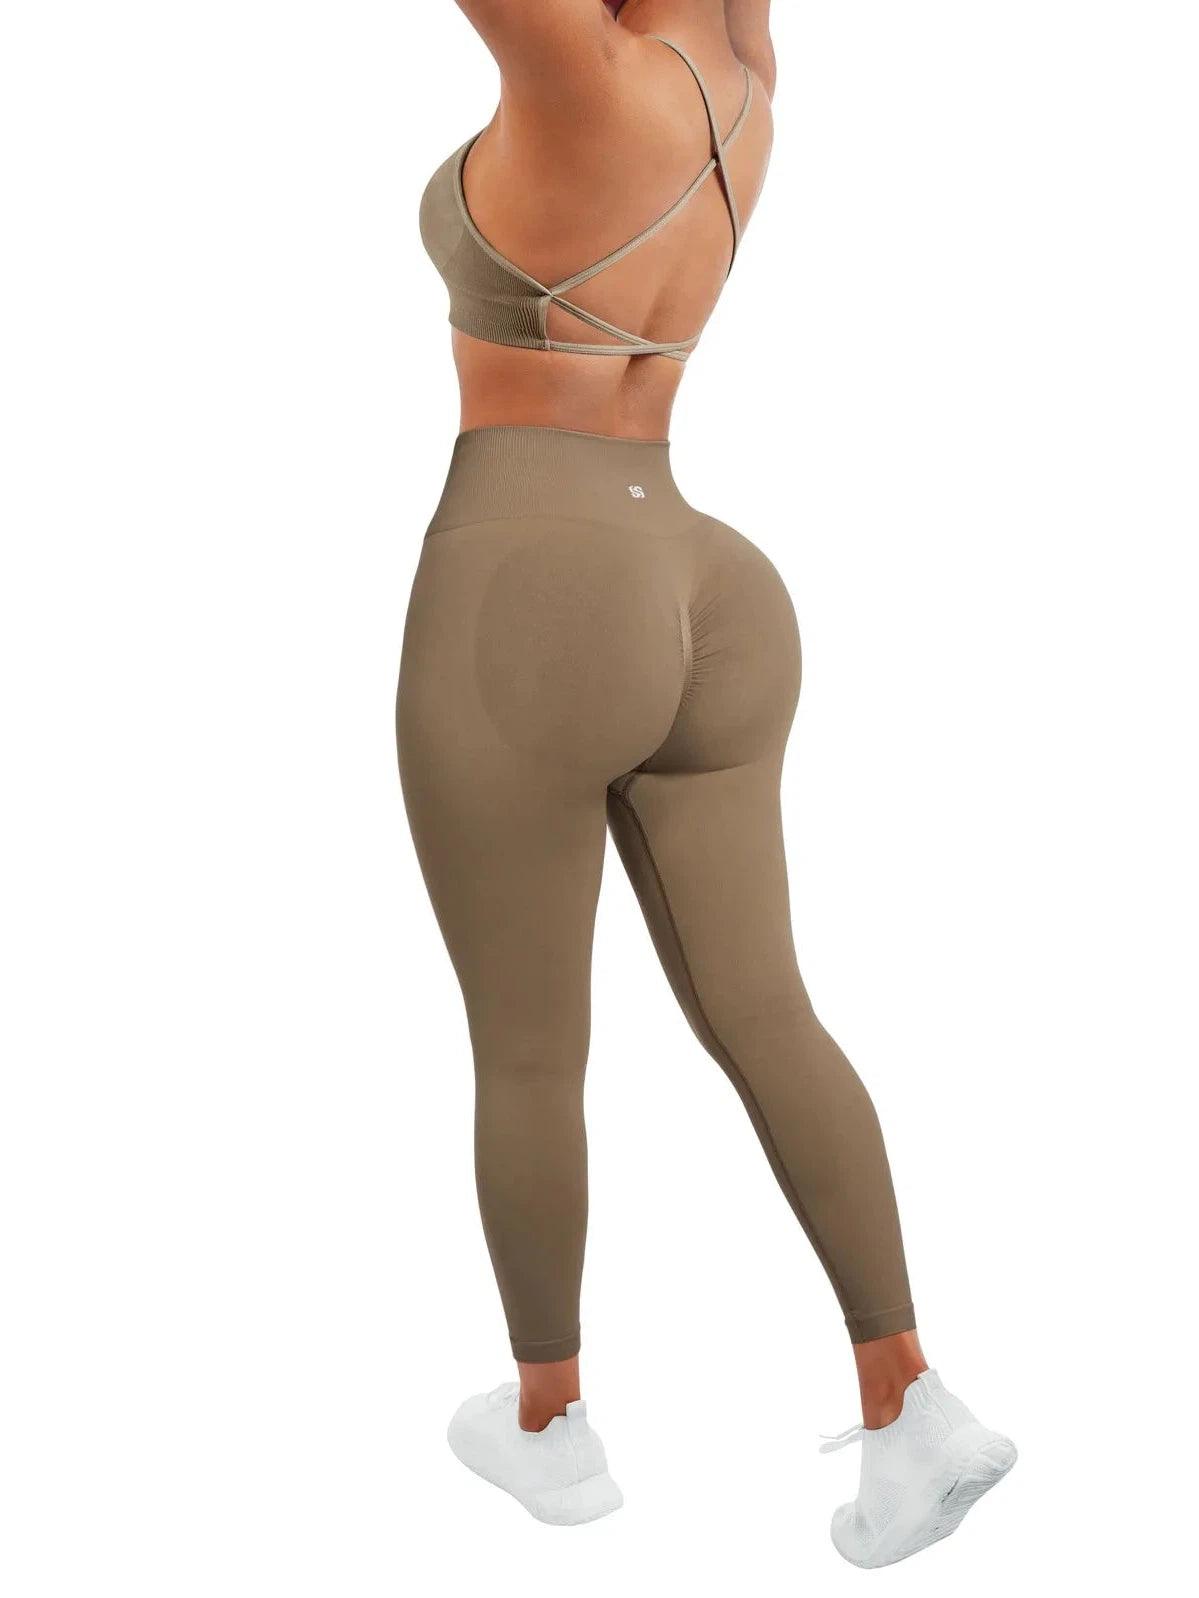 GetUSCart- SUUKSESS Sexy Butt Lifting Leggings for Women Honeycomb High  Waisted Workout Tights Pants (Medium, Grey)